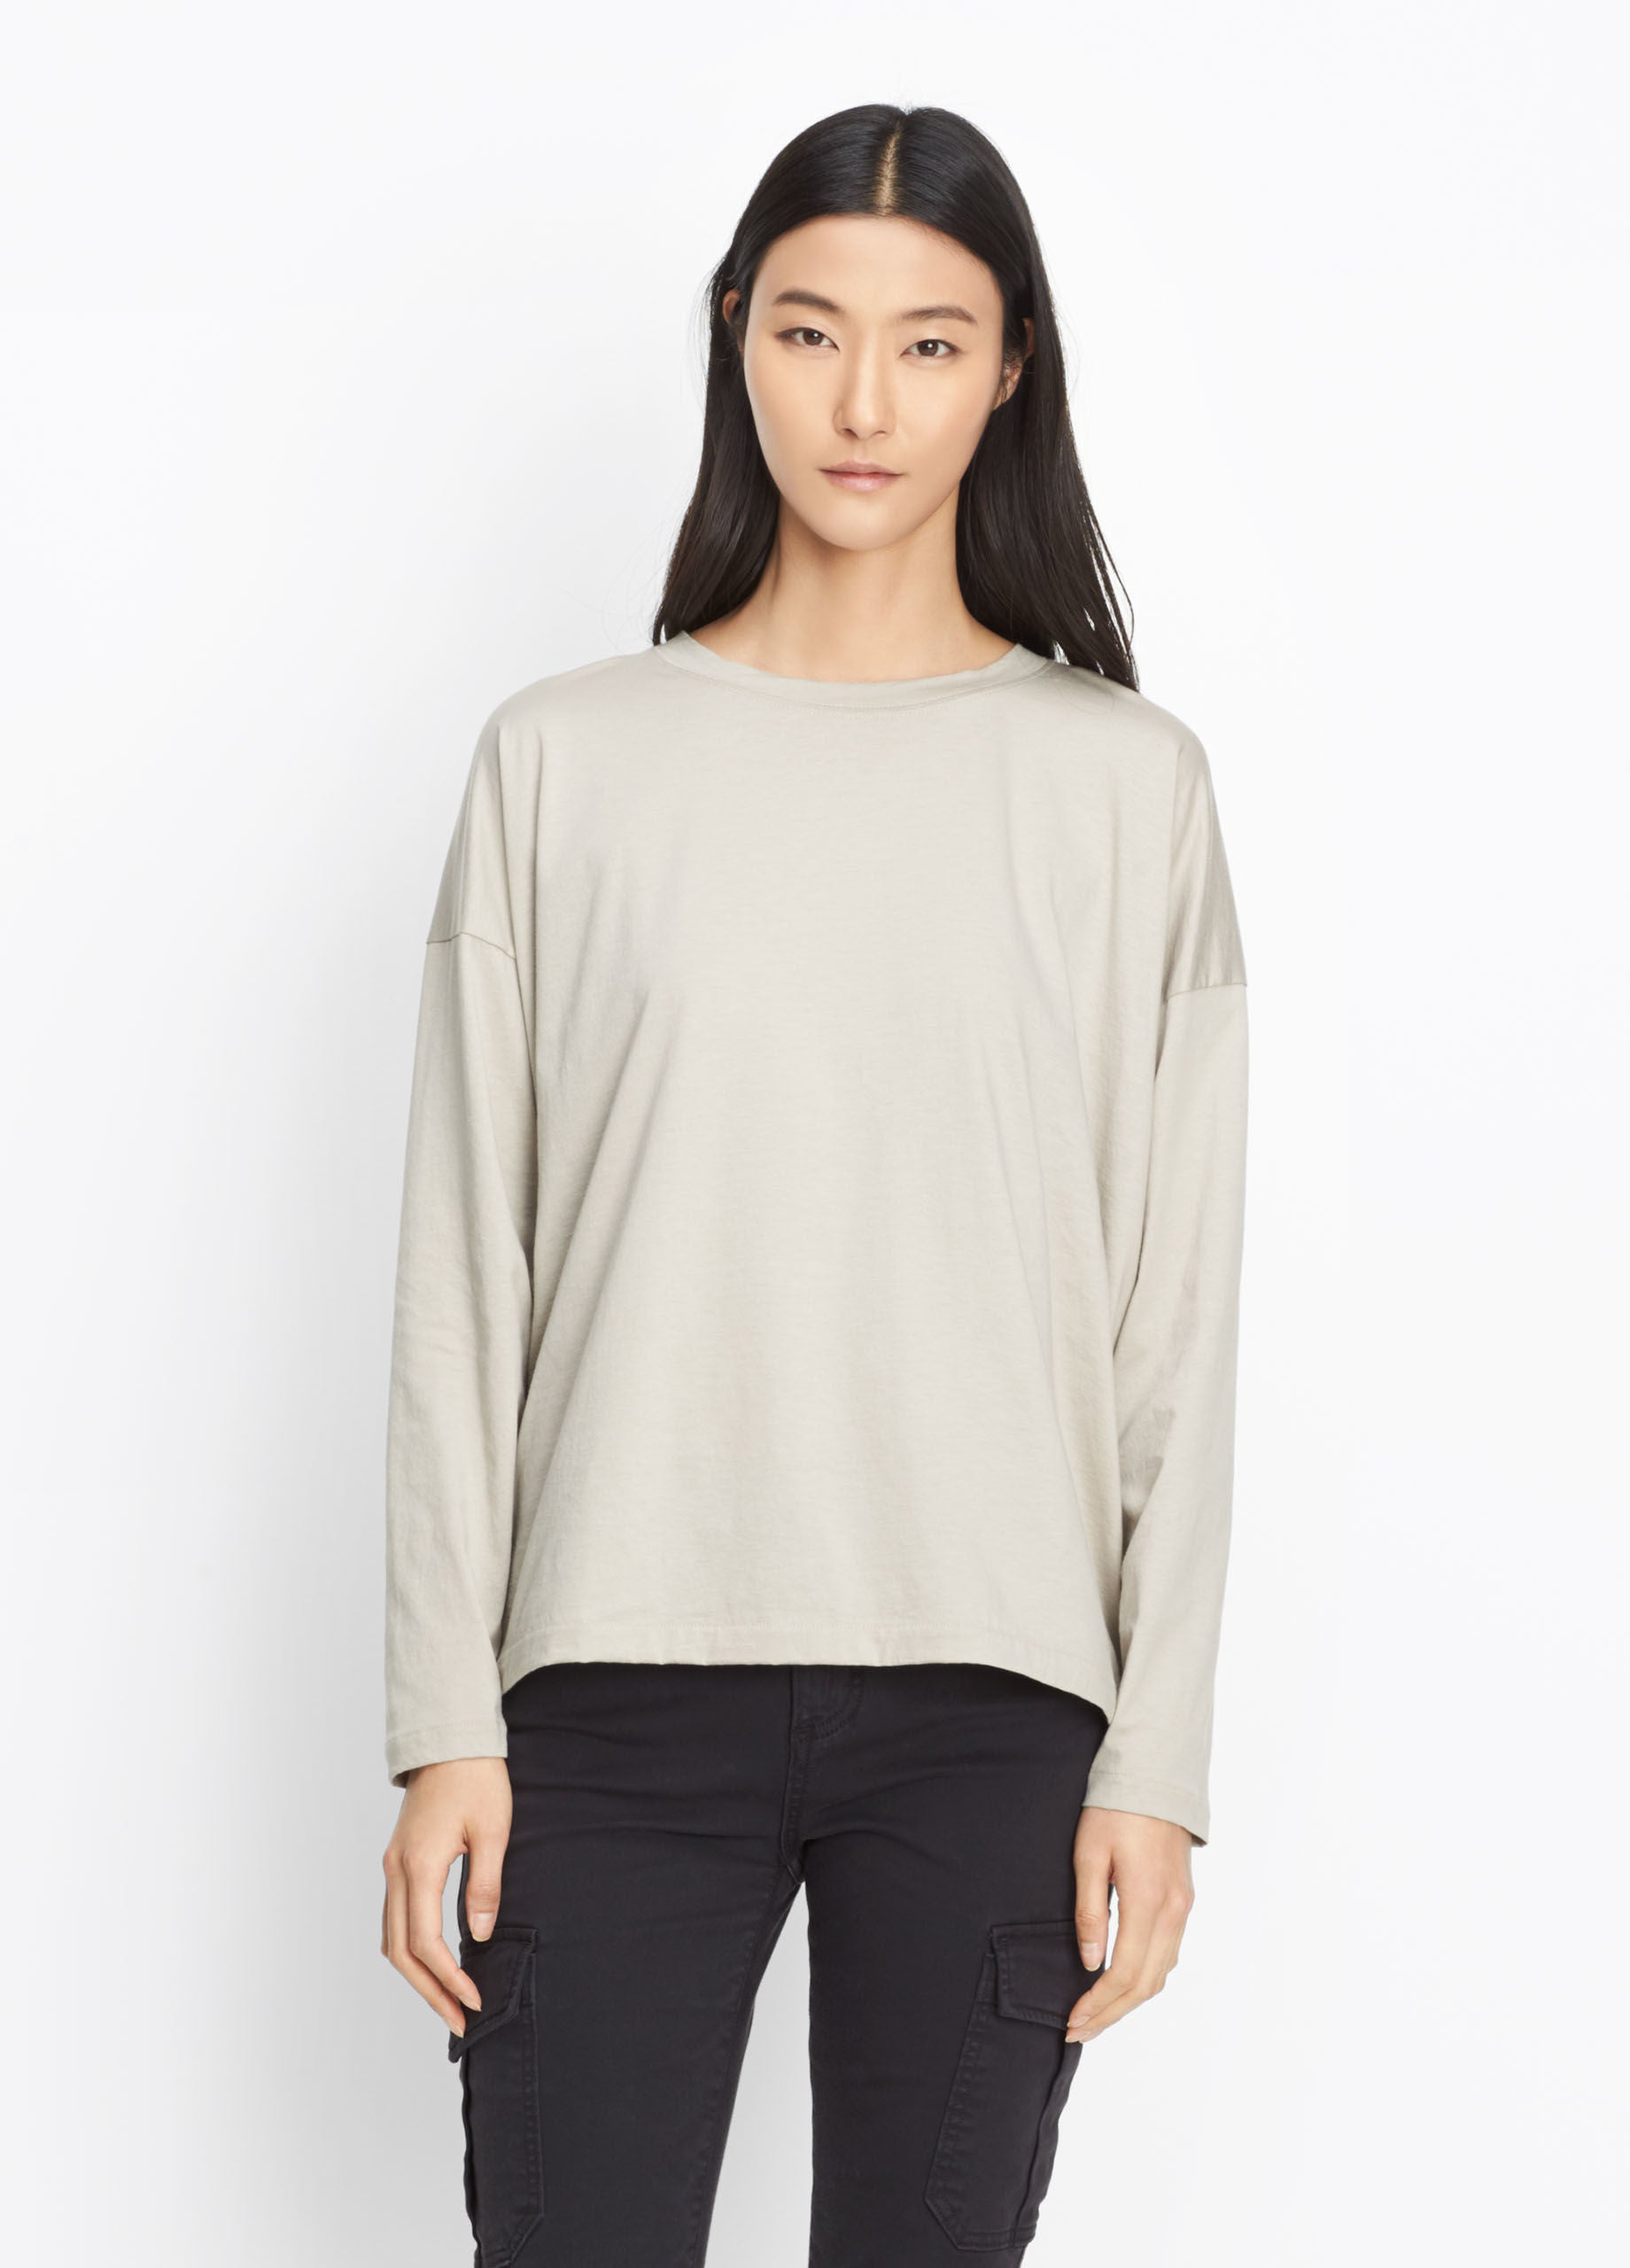 Vince Relaxed Long Sleeve Tee